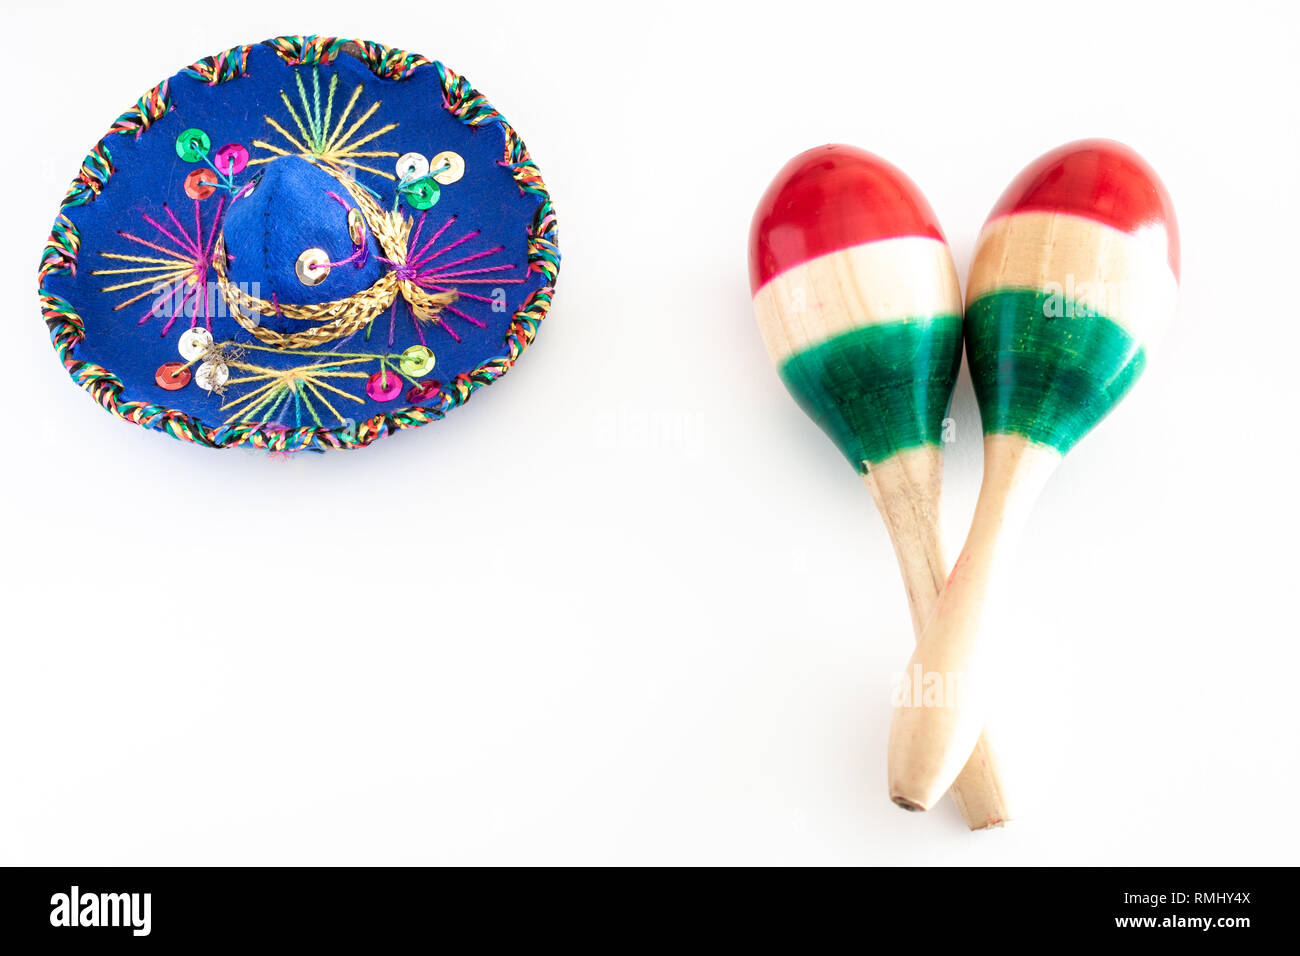 Blue sombrero with colorful ornaments on white background next to pair of maracas pained with the colors of the Mexican flag/Cinco de Mayo concept Stock Photo